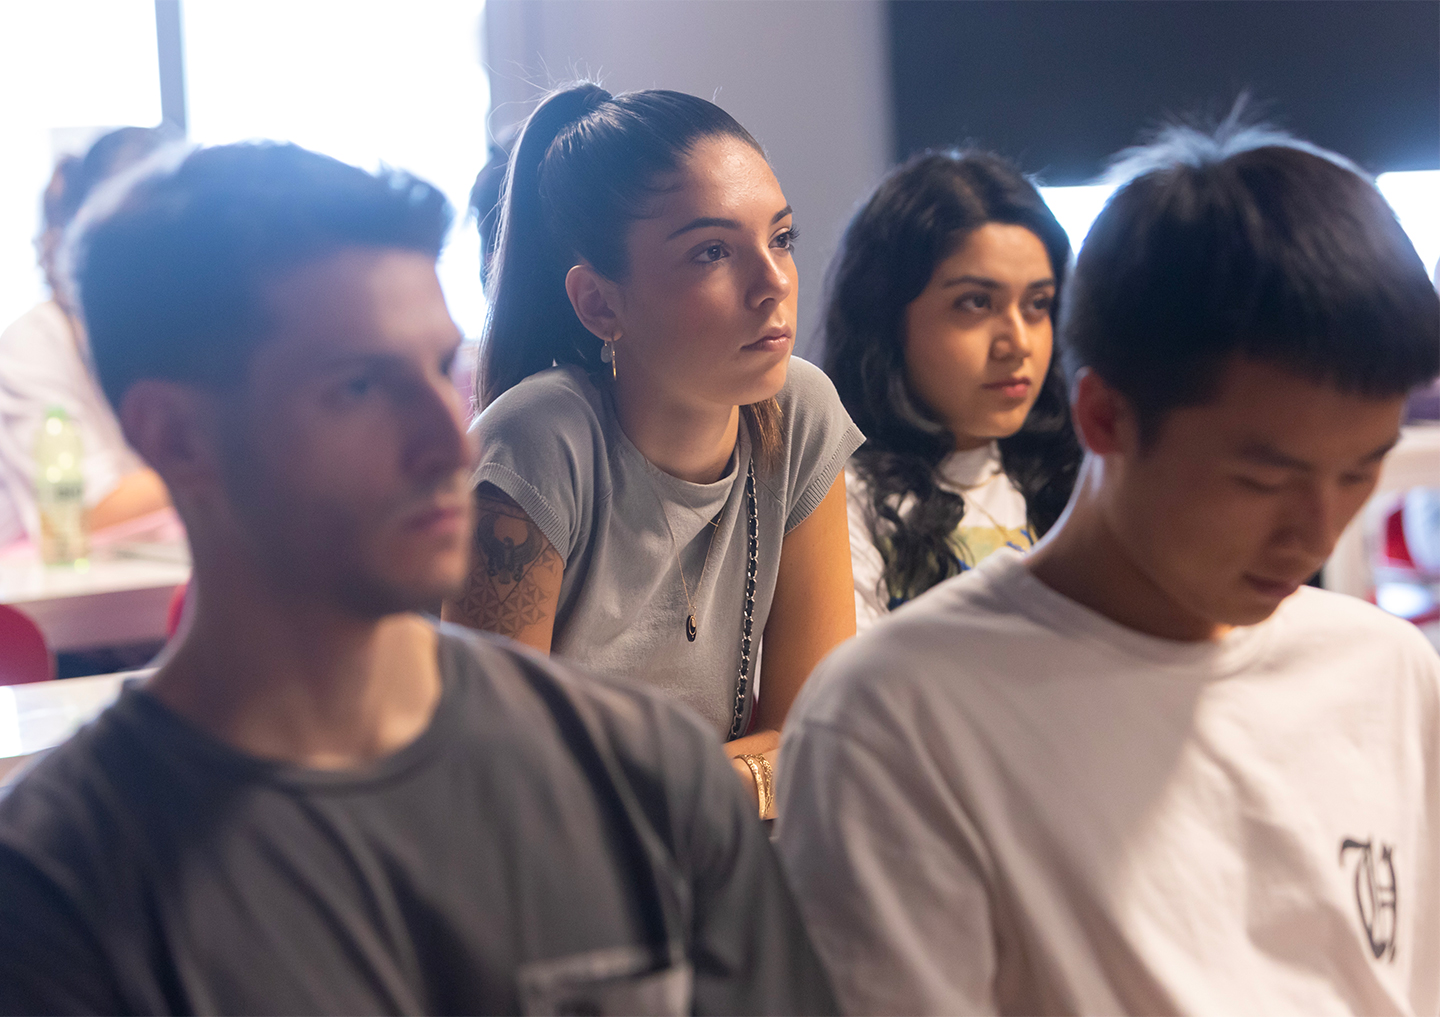 Fashion Design Master’s students and Fashion Styling, Creative Direction and Digital ContentMaster’s students attending the launch of Christian Boaro’s Industry Project at Istituto Marangoni in Milan